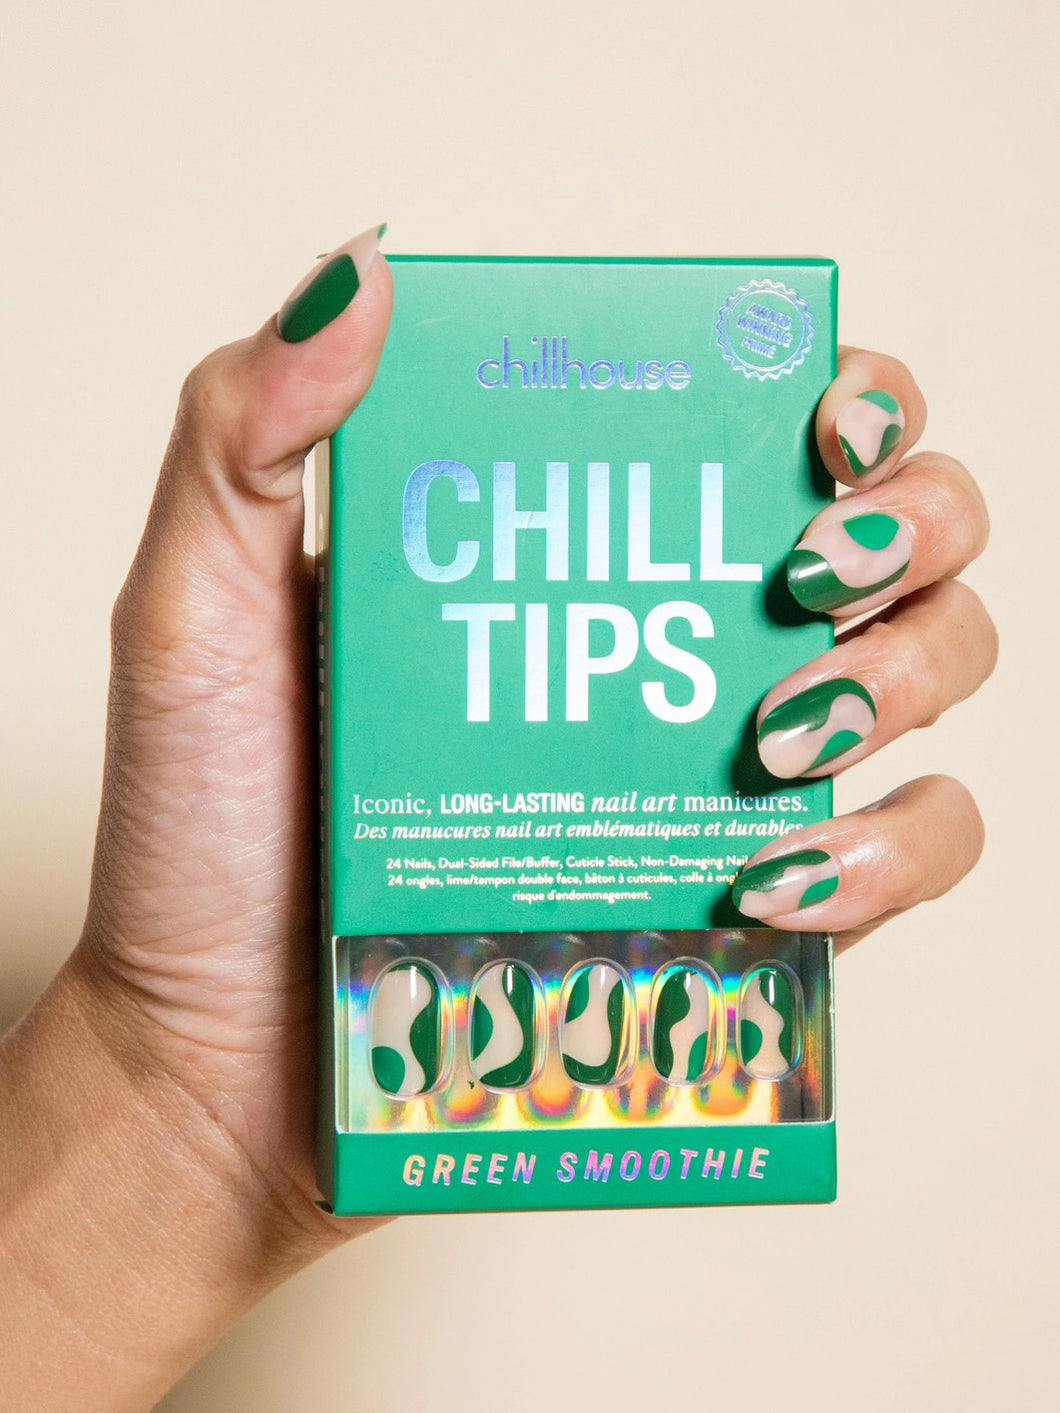 Green Smoothie Chill Tips - Chillhouse - Berte